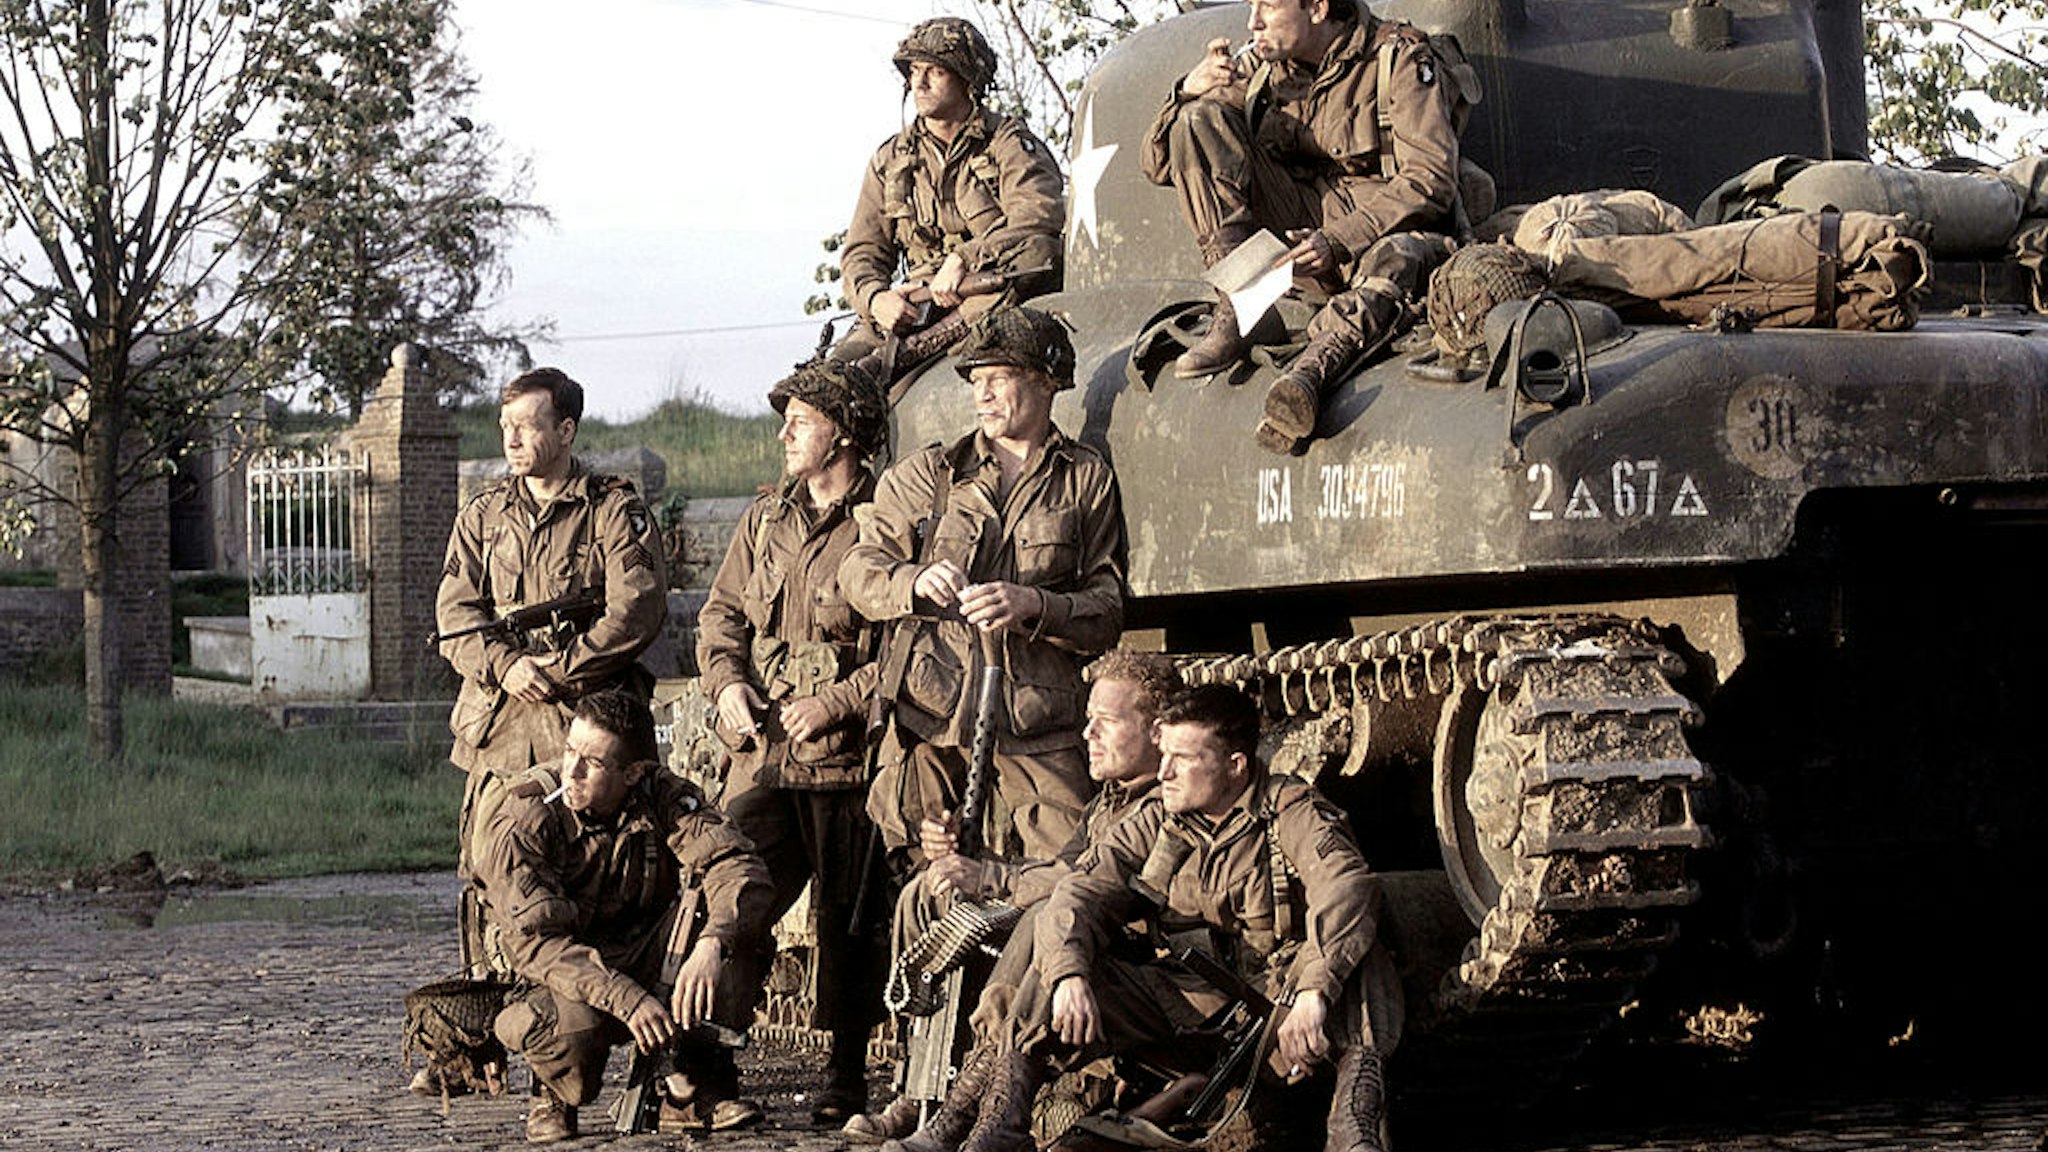 391254 11: The cast acts in a scene from HBO''s war mini-series "Band Of Brothers." (Top row from L to R) Phillip Barantini (as Sisk) and Ross McCall (as Leibgott). (Bottom row from L to R) Scott Grimes (as Malarkey), Donnie Wahlberg (as Carwood Lipton), Kirk Acevedo (as Joe Toye), Neal McDonough (as Lynn "Buck" Compton), Adam James (as Cleveland Petty) and Frank John Hughes (as Sgt. Bill Guamere). (Photo by HBO via Getty Images)